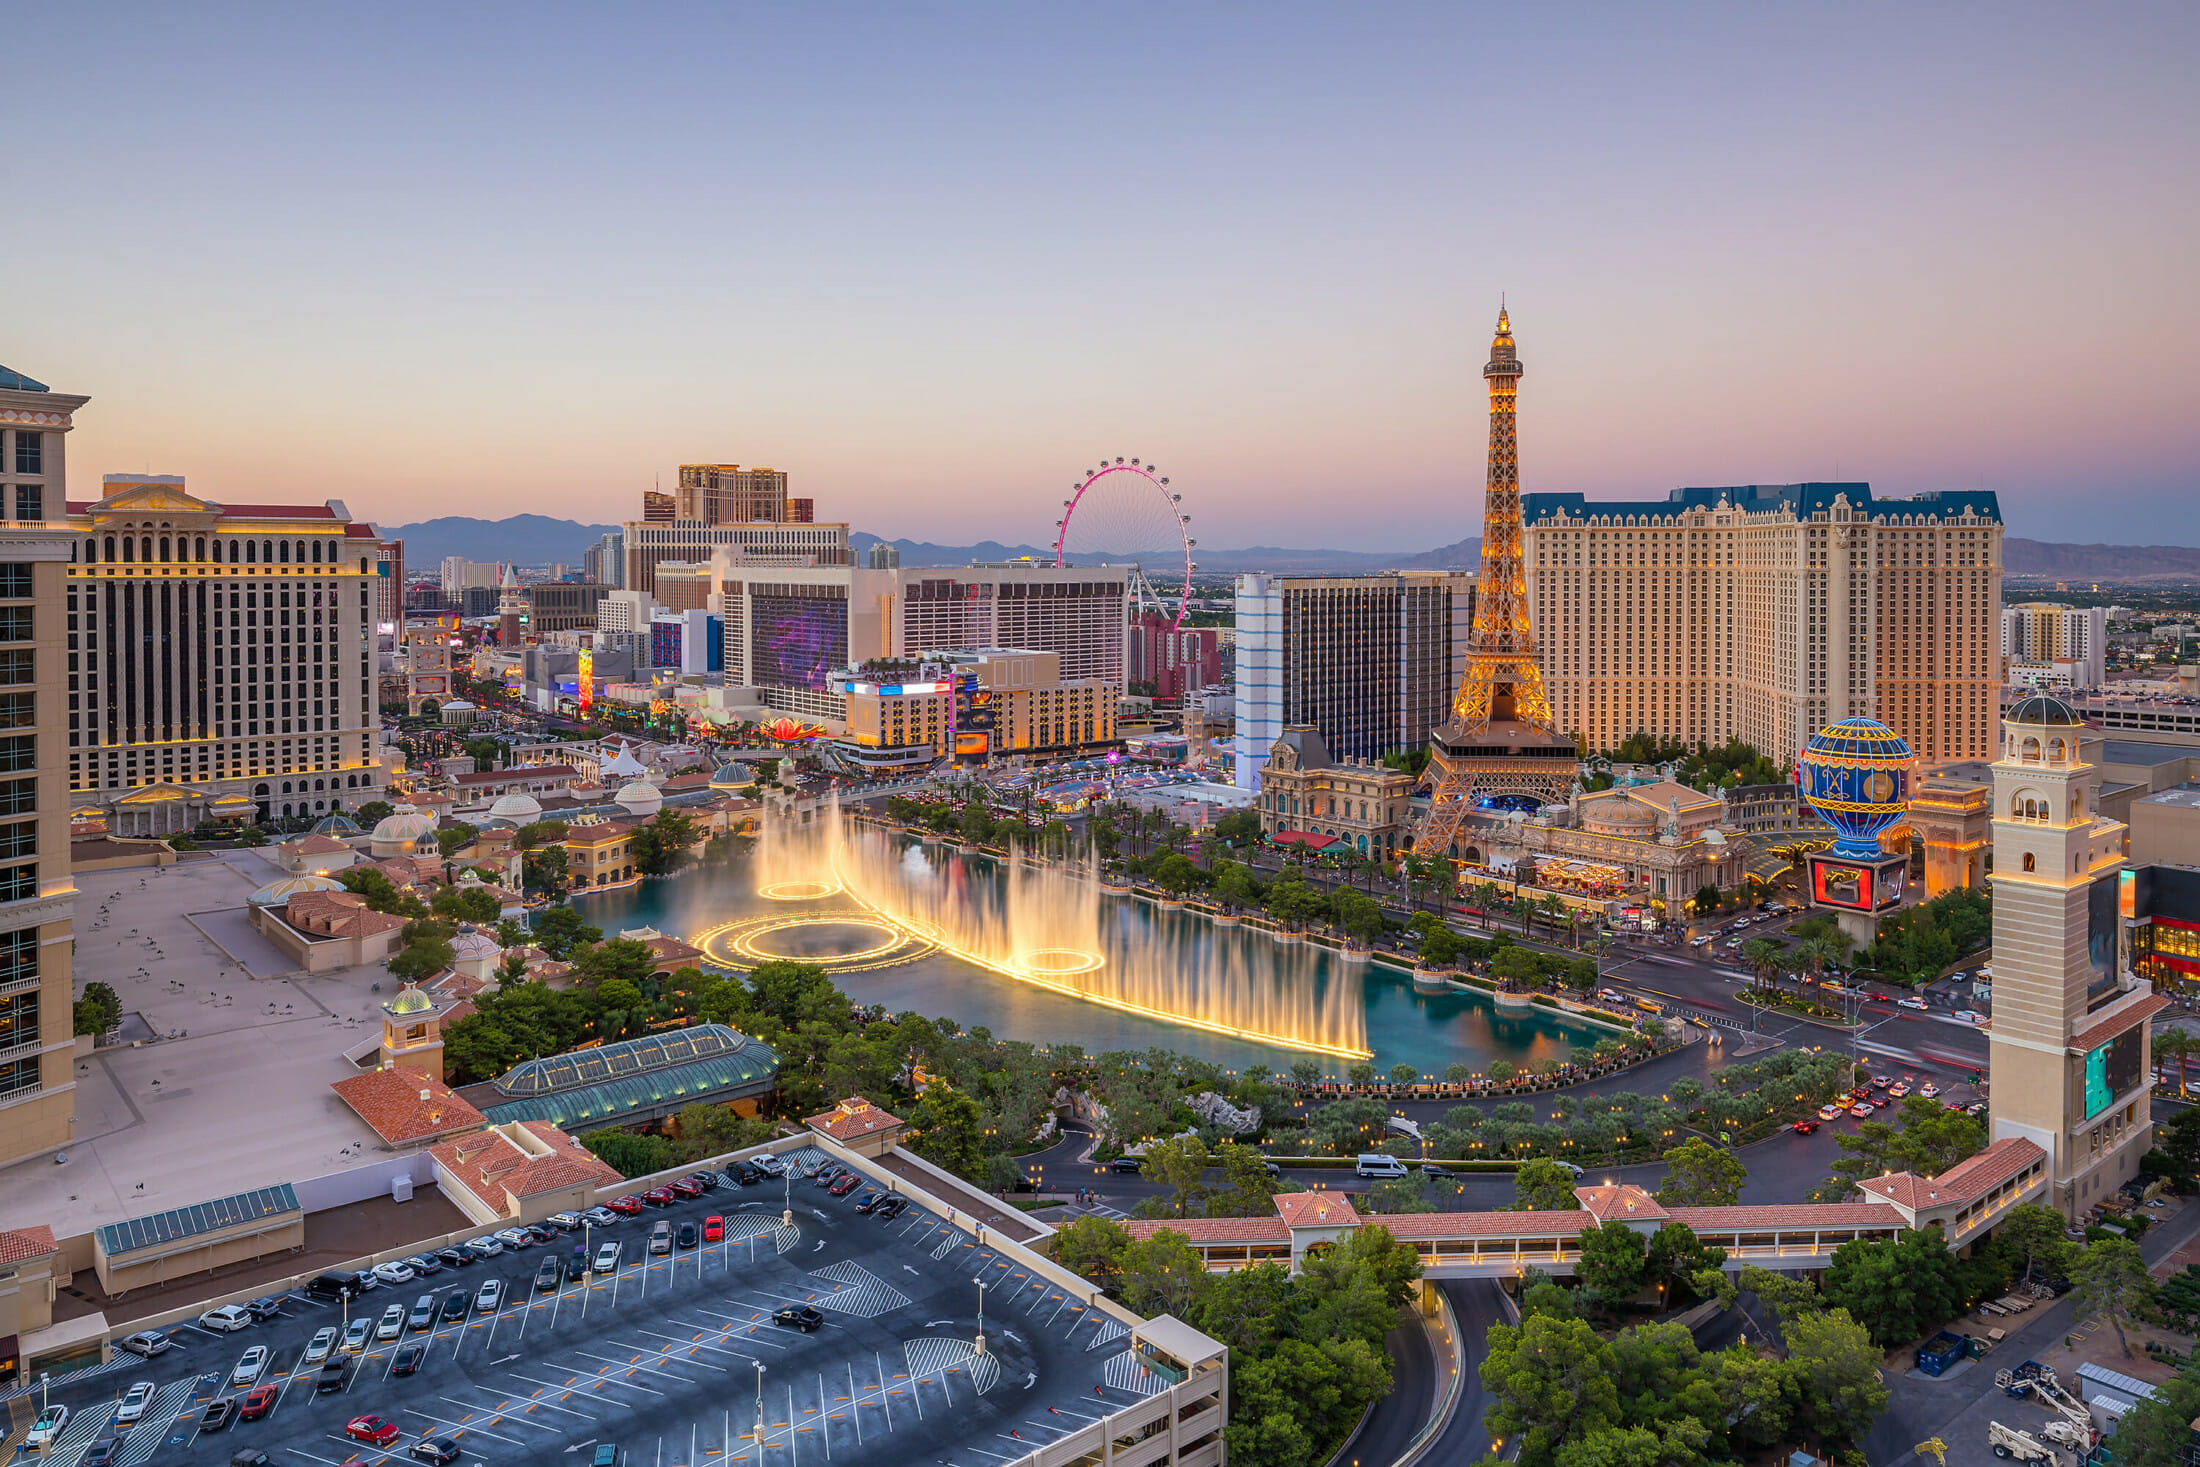 Las Vegas, Nevada | 50 Up-and-Coming Real Estate Markets to Watch in 2019 | Buildium